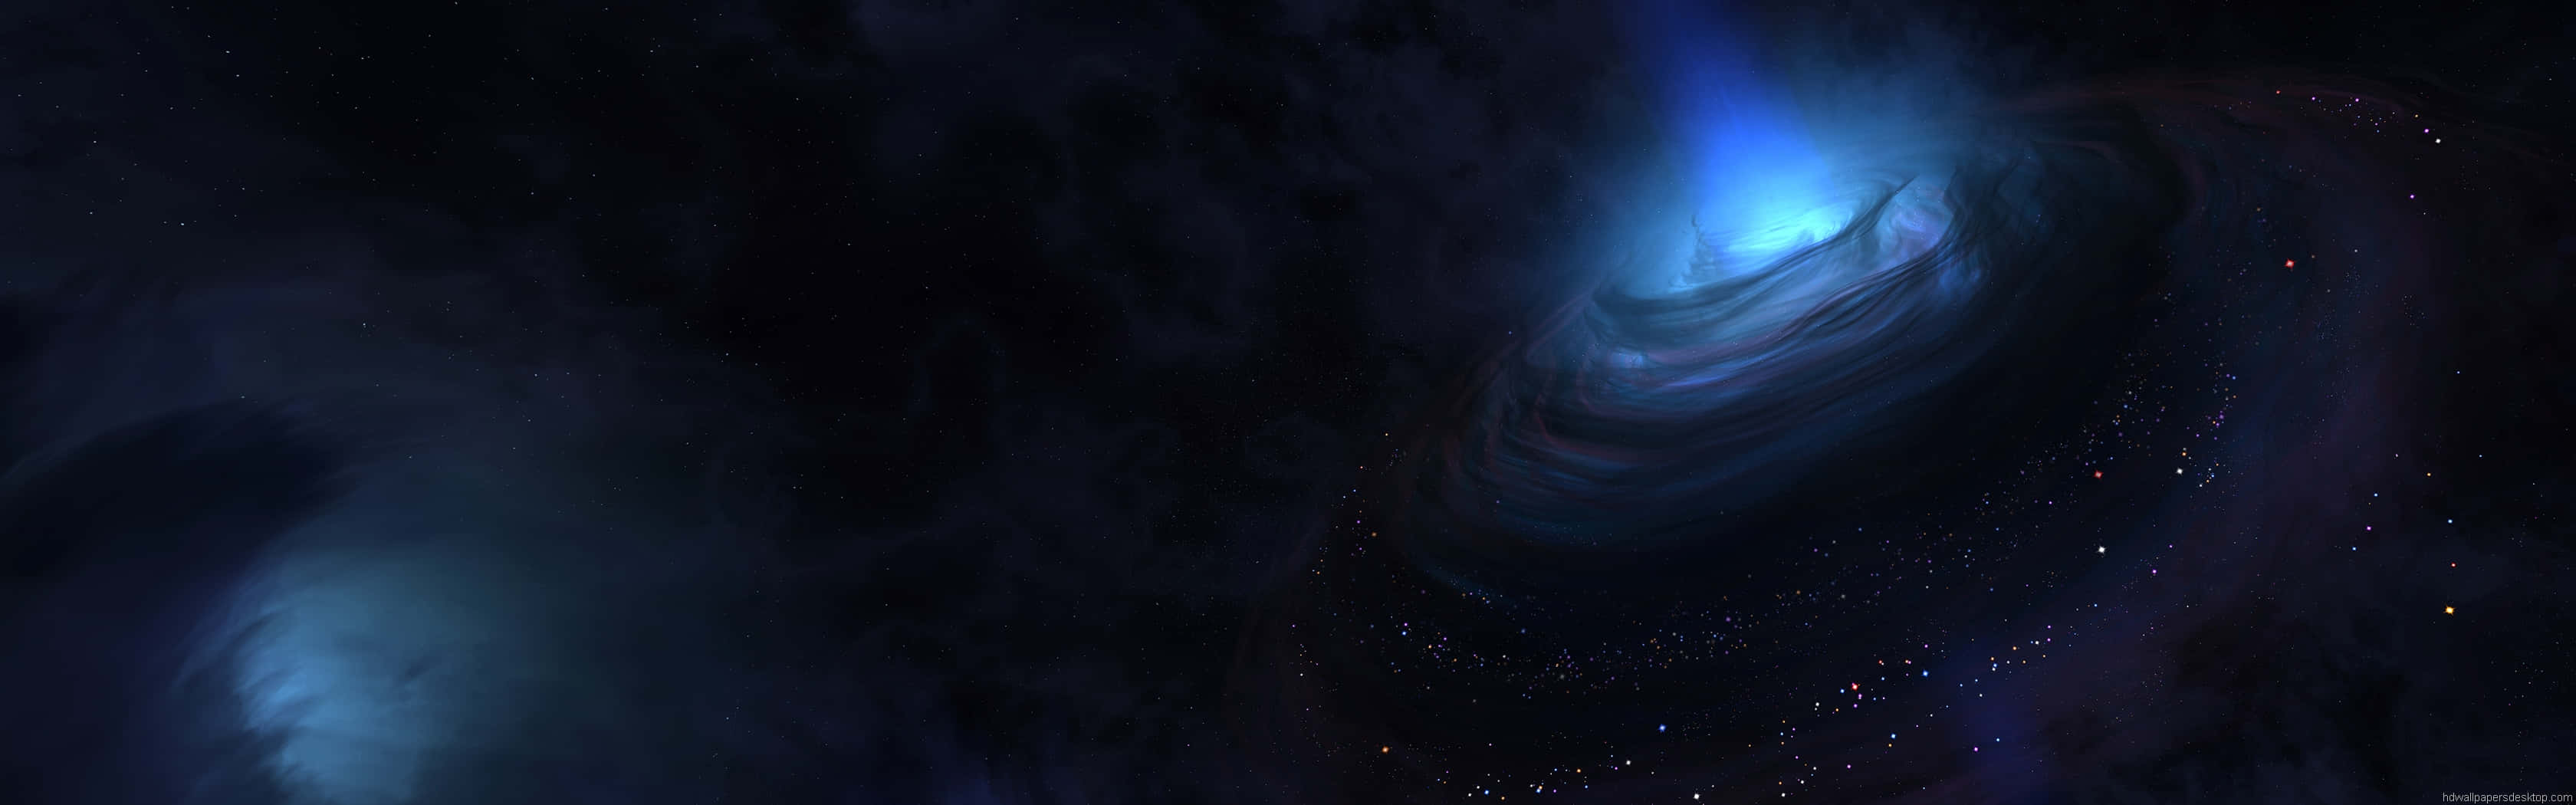 Blue Space With Blue Swirl Ultra Hd Dual Monitor - Wallpaper Wallpaper